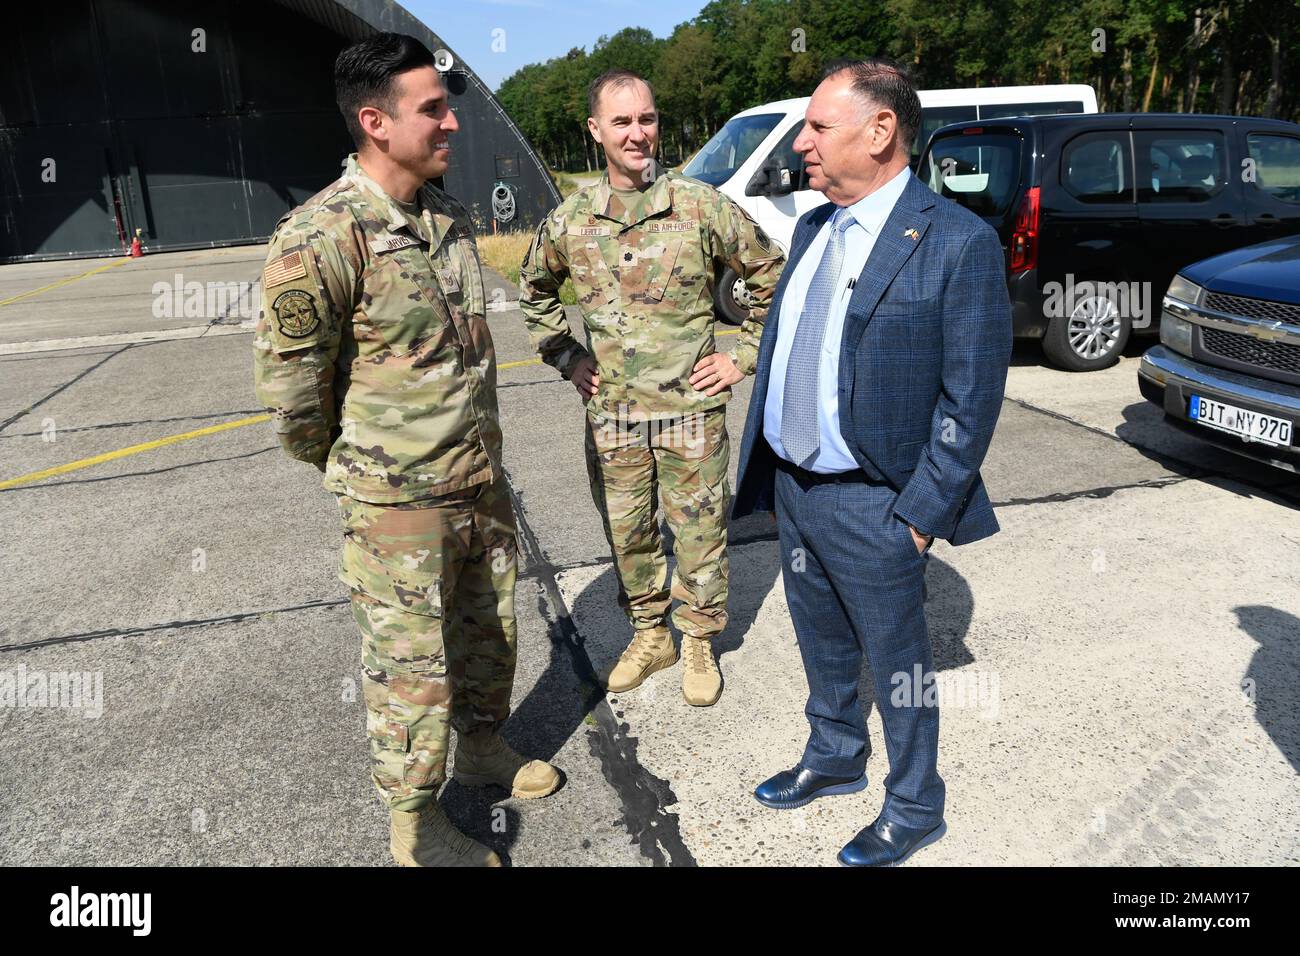 U.S. Air Force Lt. Col. Timothy Liebold, 701st Munitions Support Squadron commander (center), and Tech. Sgt. Sean Jarvis, 701st Munitions Support Squadron custody forces specialist, greet United States Ambassador to the Kingdom of Belgium Michael M. Adler, at Kleine Brogel Air Base, Belgium, on May 31, 2022. The custody forces team works hand in hand with their Belgian counterparts to maintain security and law enforcement on base. Stock Photo